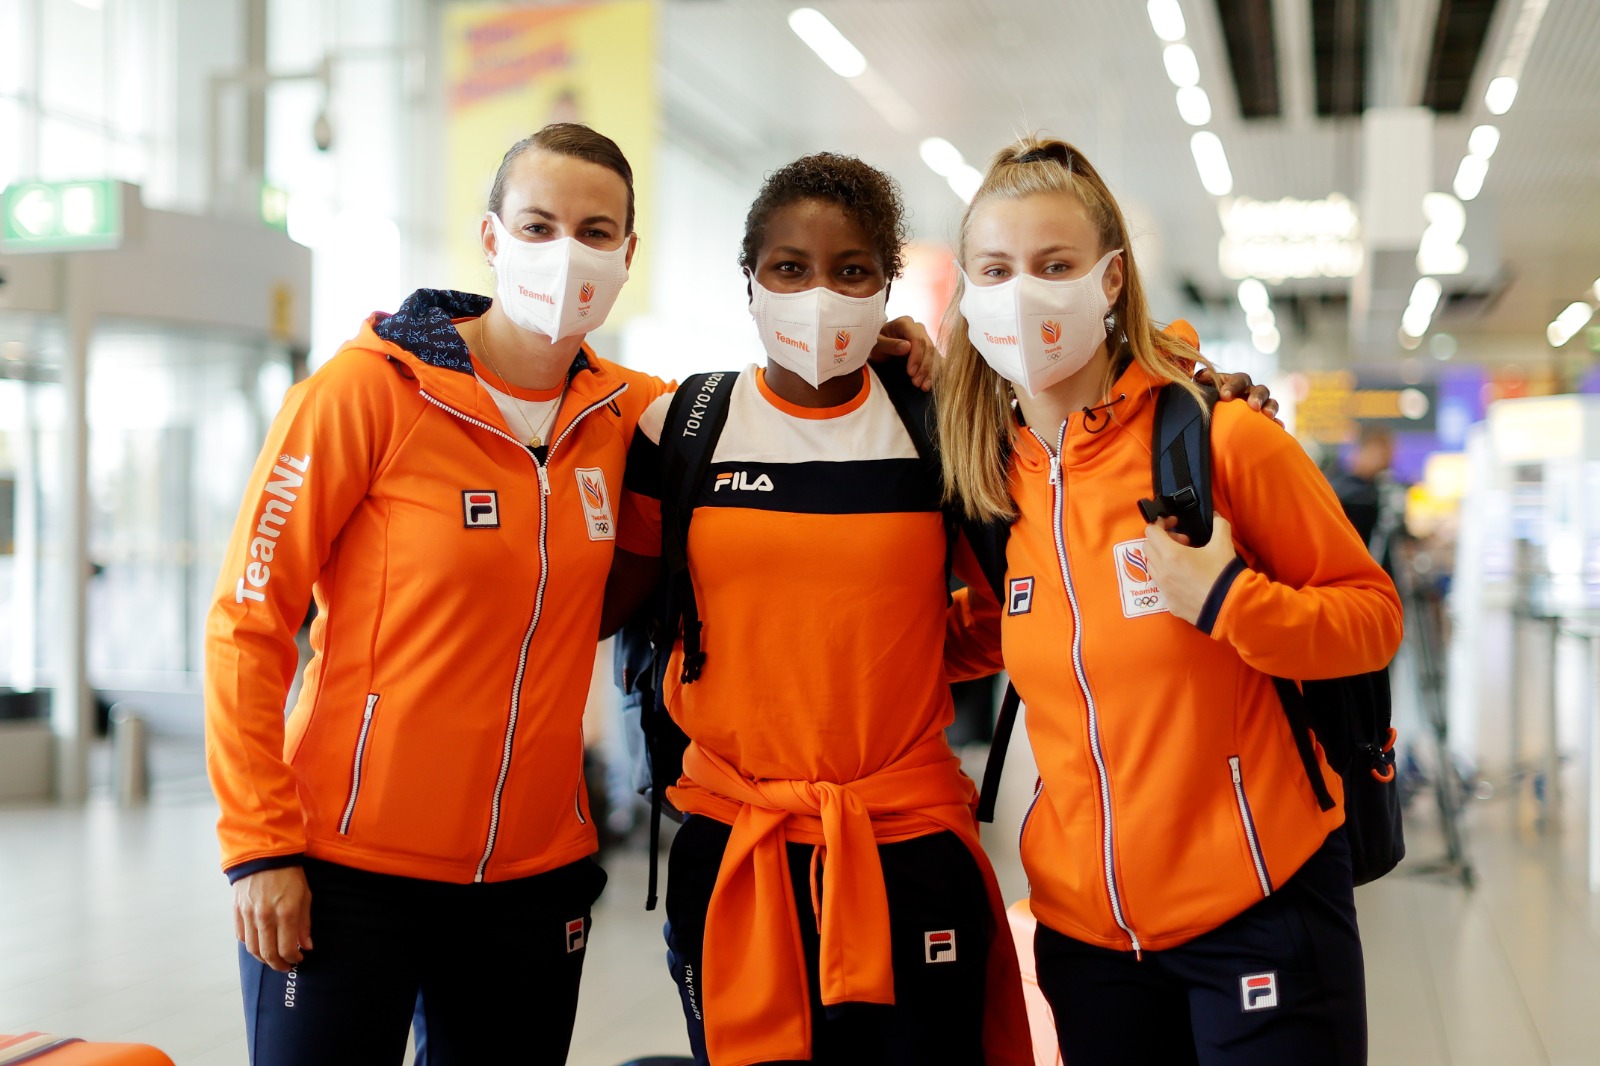 veiling rechtop kool Football Shirt Collective on Twitter: "A reminder that next month's  #Tokyo2020 Olympic Games will be a chance to see international teams in  alternative gear 😍 For example, The Netherland's Women's Olympic football